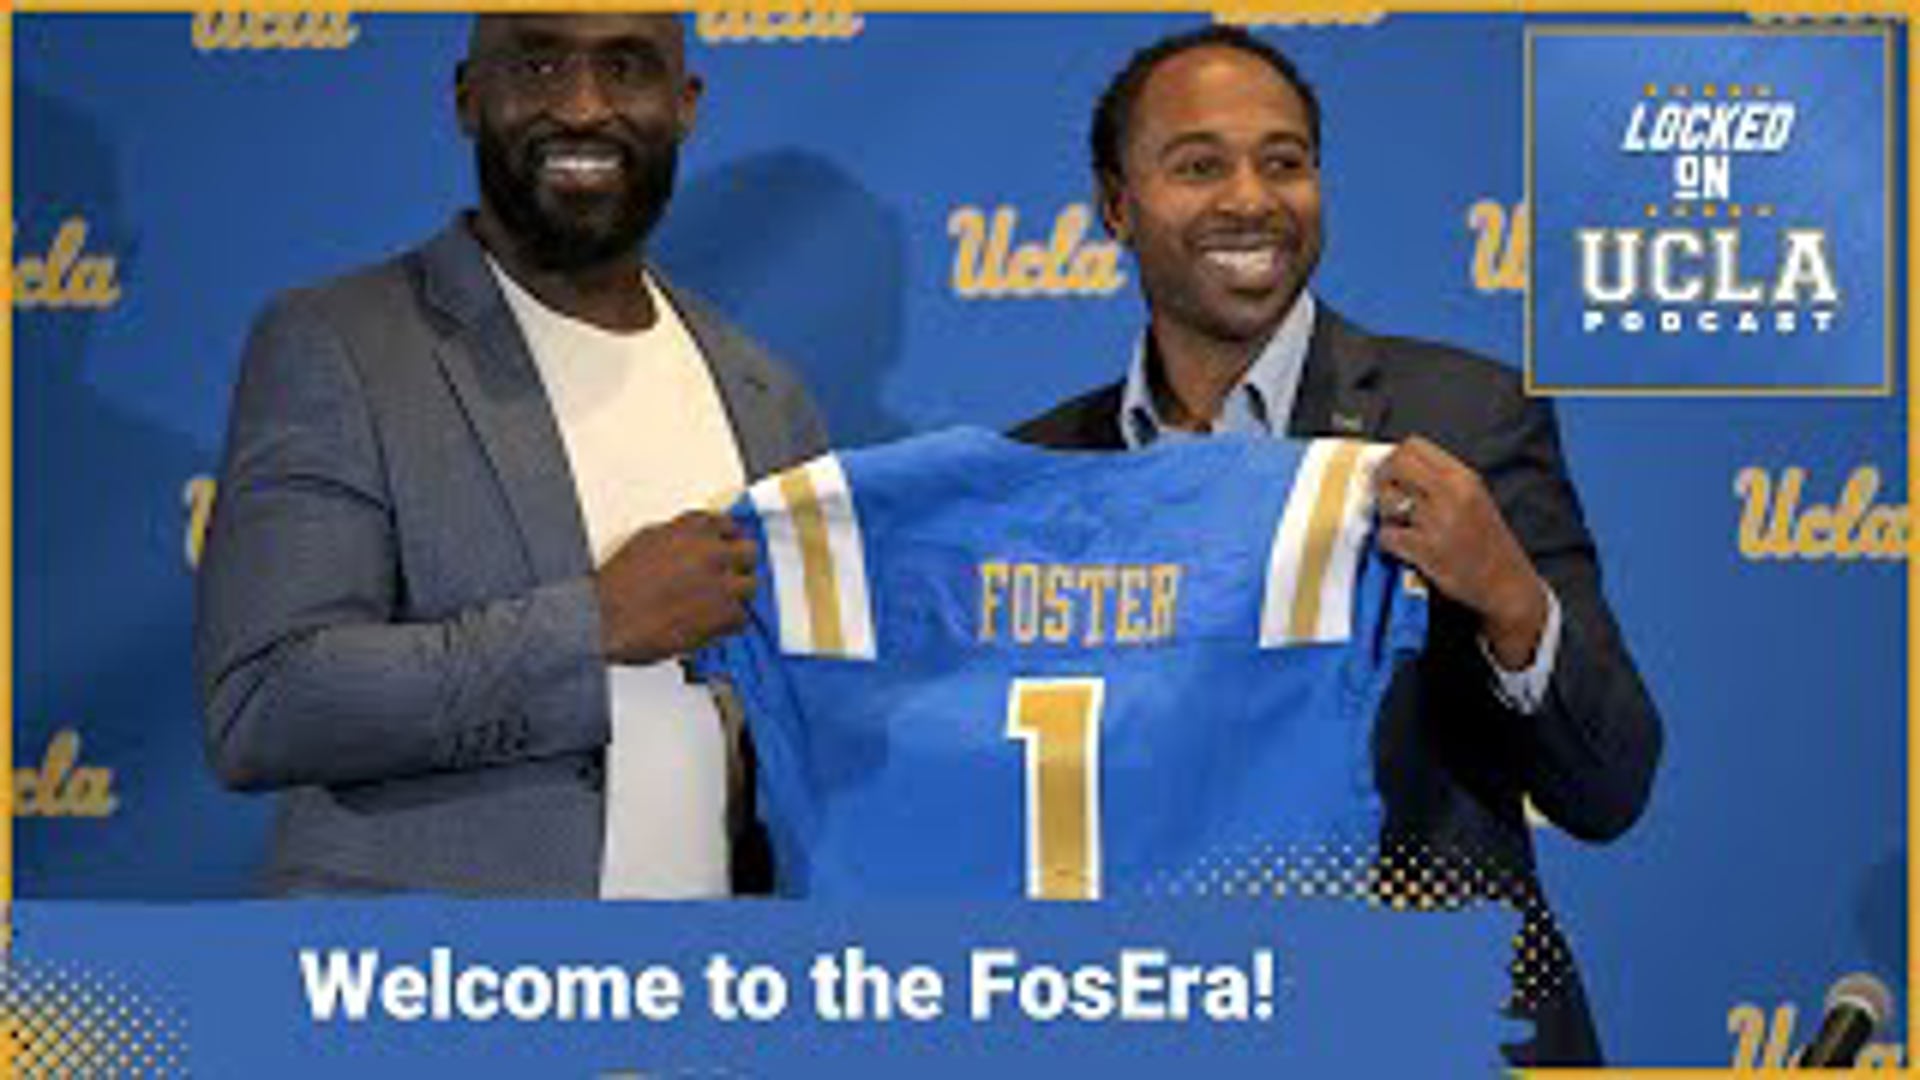 On this episode of Locked On UCLA, Zach Anderson-Yoxsimer discusses UCLA Football entering the DeShaun Foster & what it means for recruiting post-Chip Kelly!